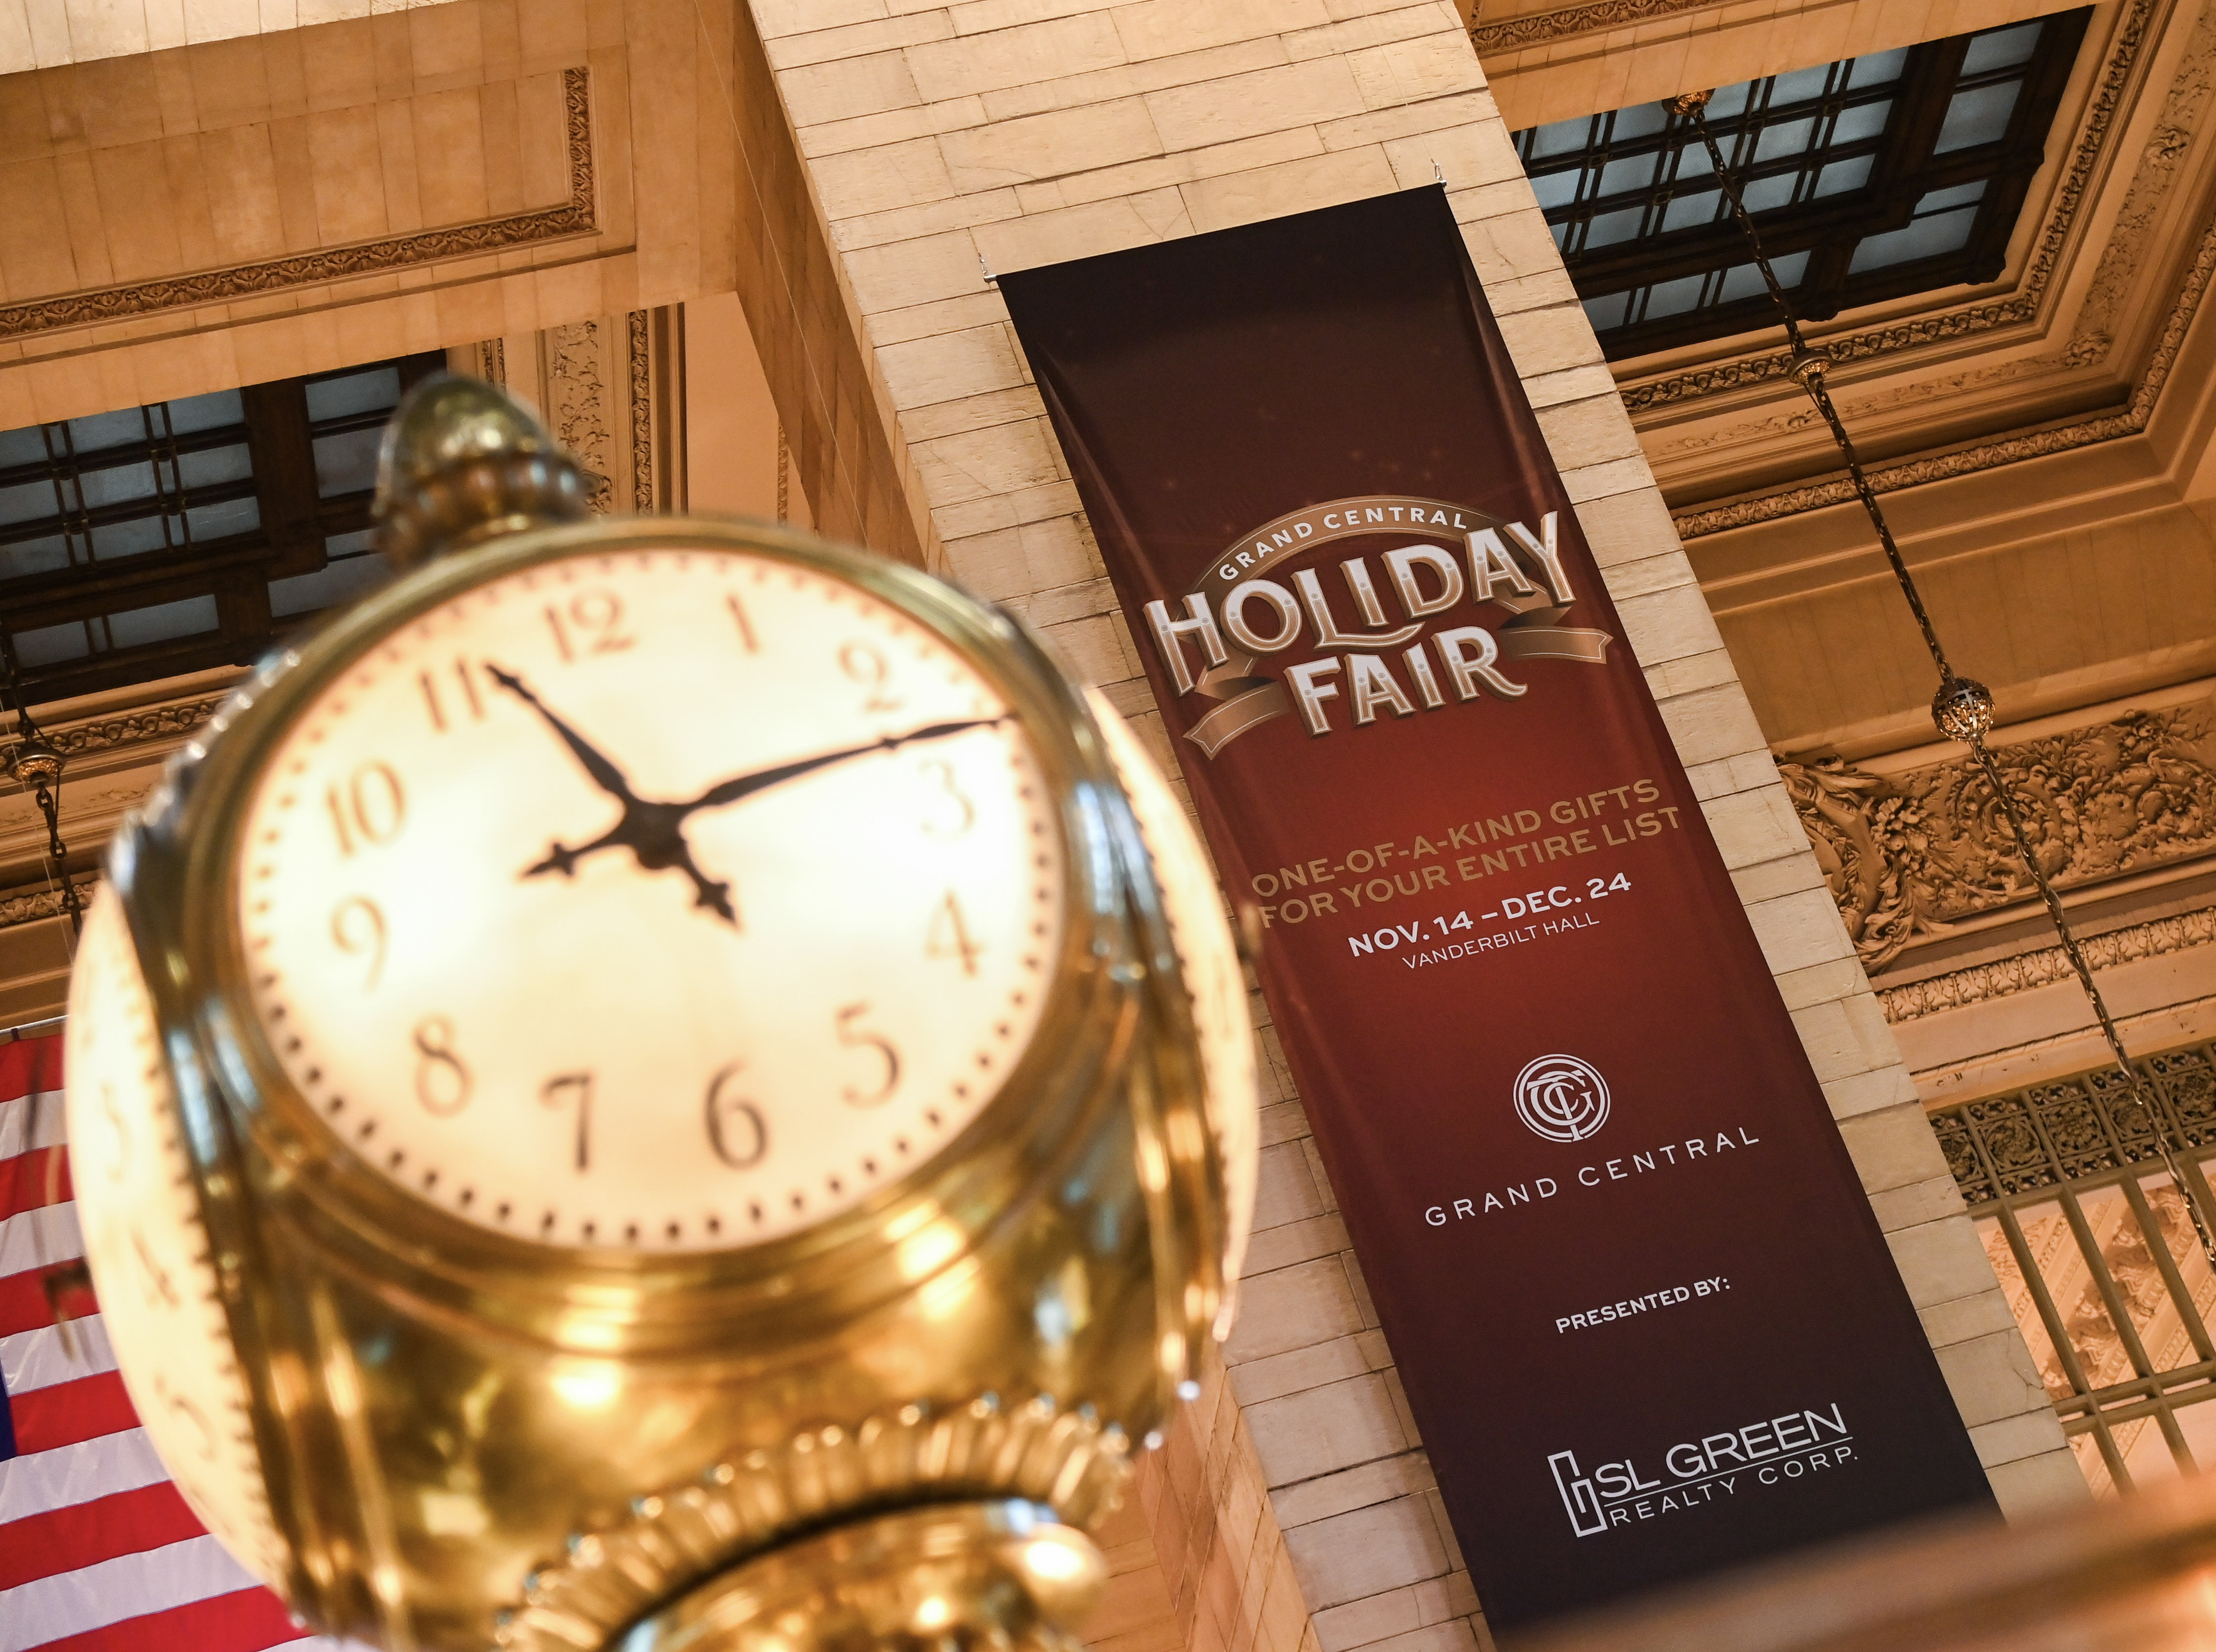 picture of the GCT clock with banner of Holiday Fair in the background